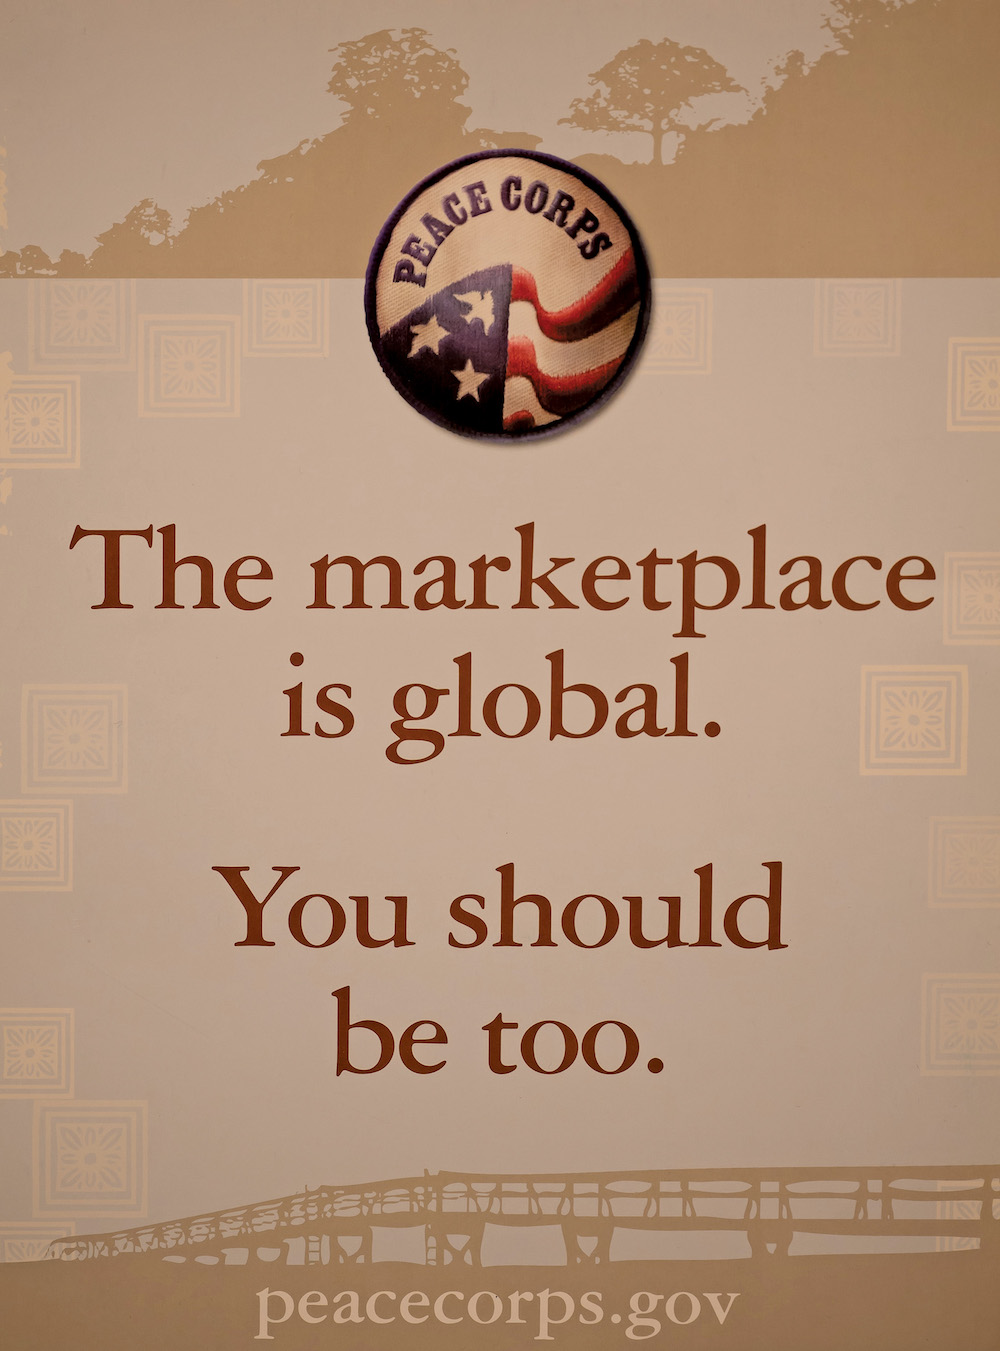 The marketplace is global. You should be too.